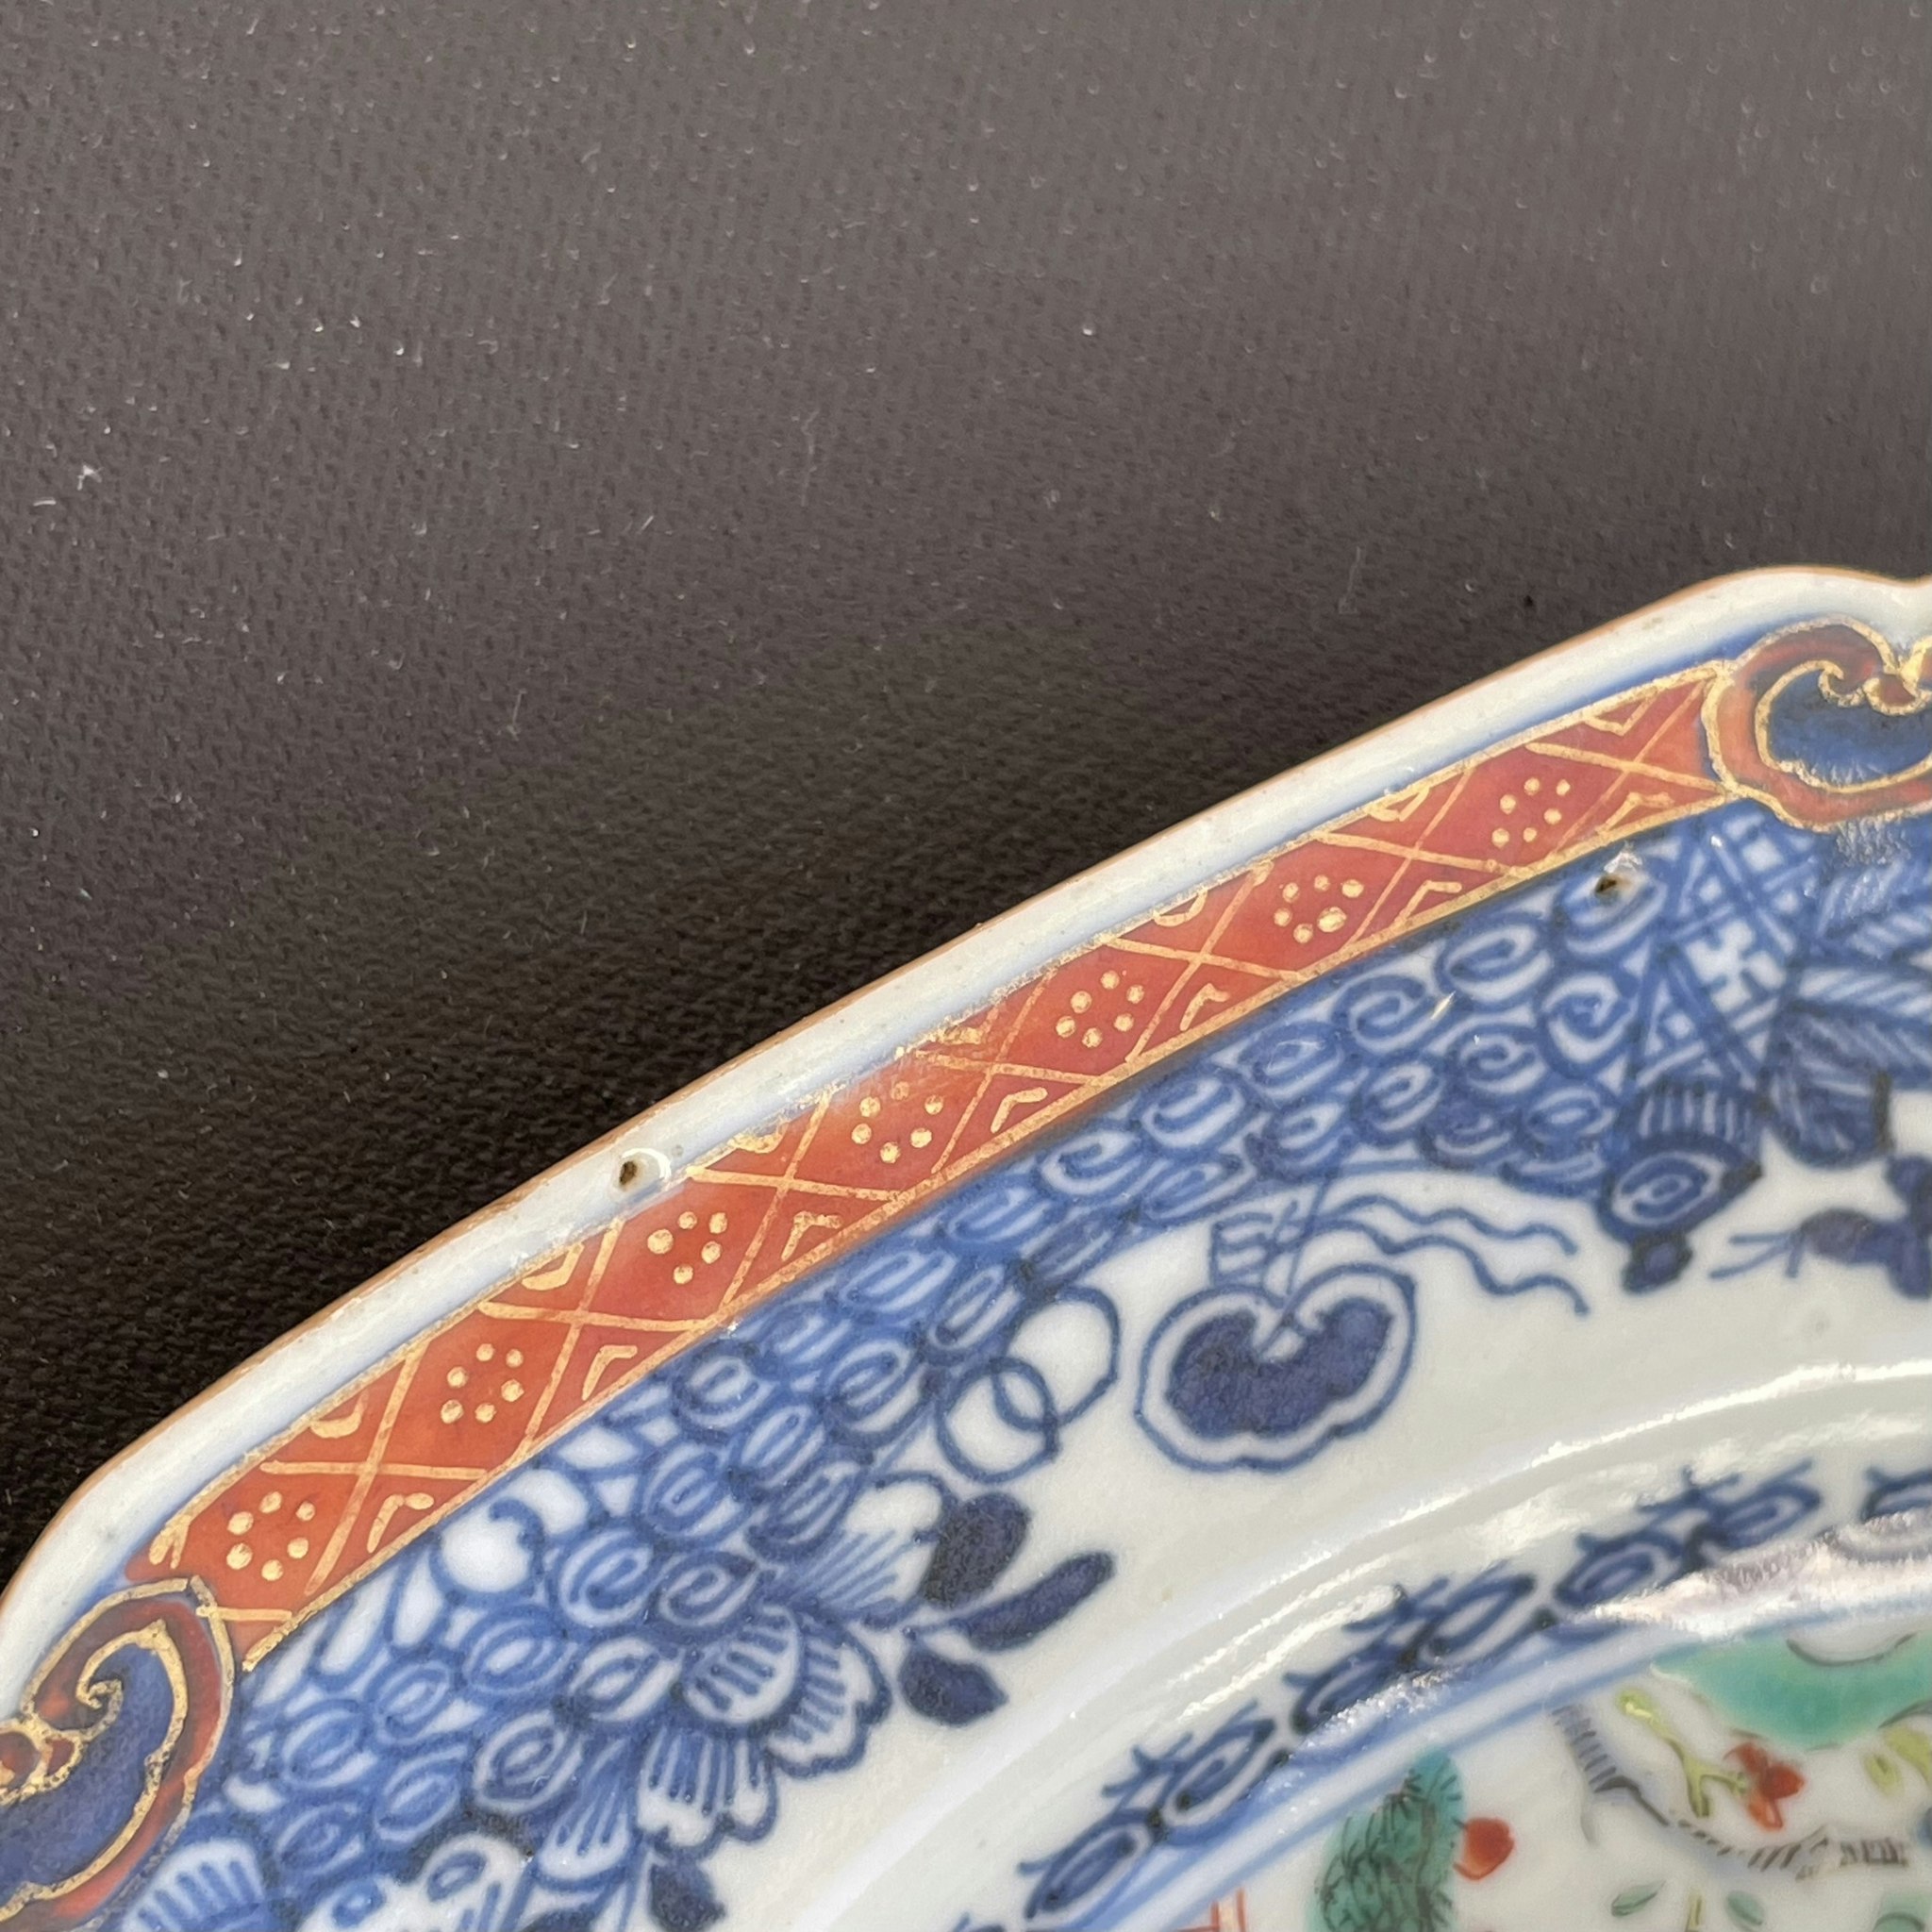 Chinese Antique Famille Rose Plate, 18th C Qianlong period #1781